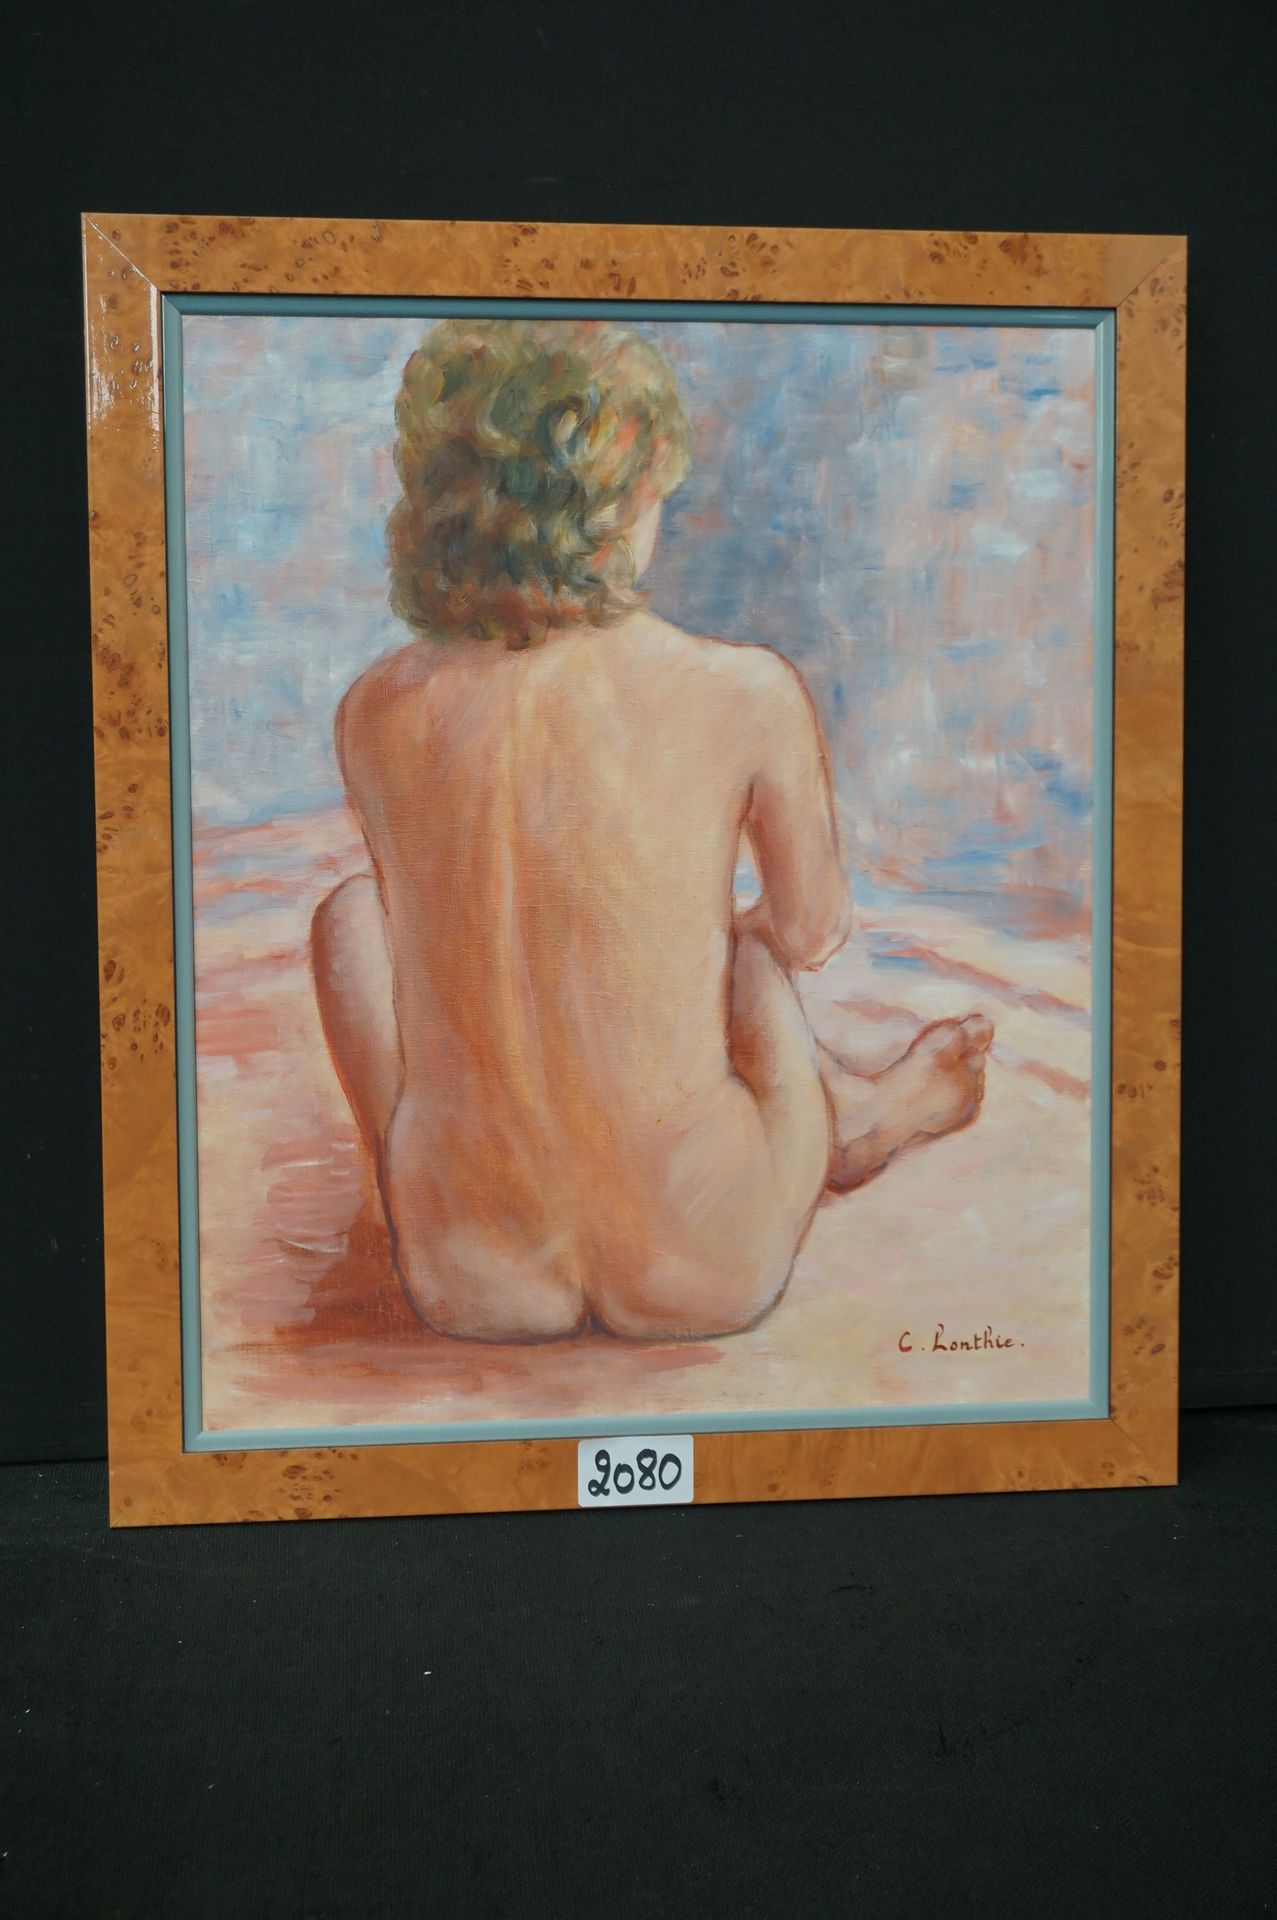 C. LONTHIE "Rugged Nude" - Oil on canvas - Signed - 60 x 50 cm